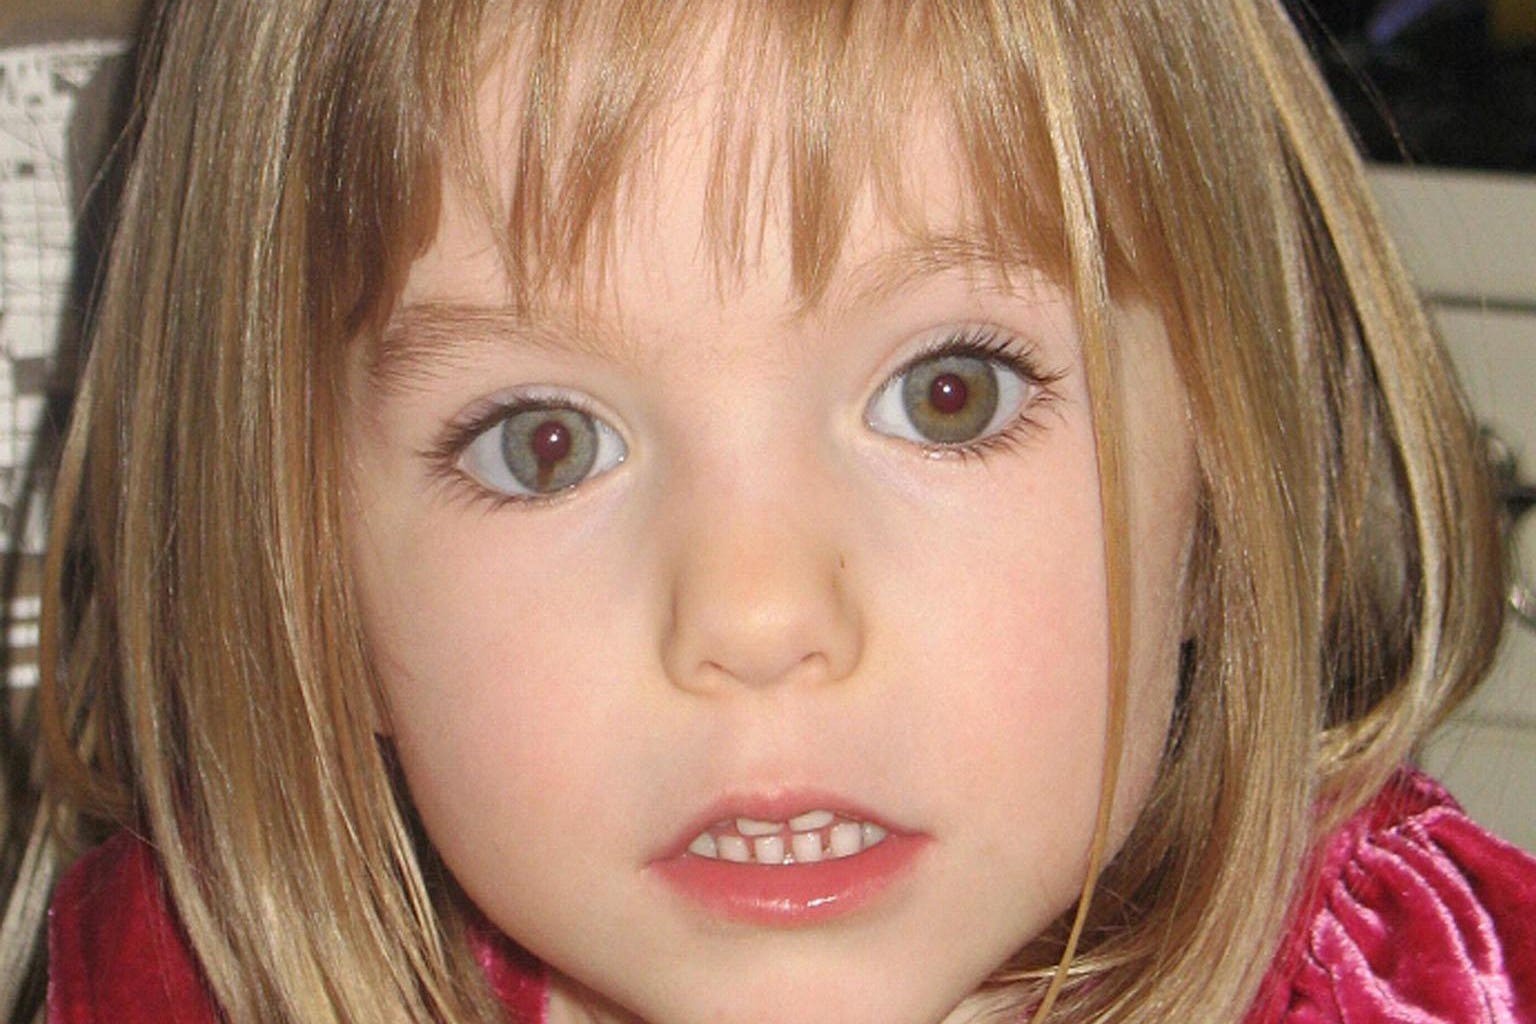 Portuguese police have reportedly apologised to the parents of Madeleine McCann for the way detectives investigated the case and treated the family (PA)